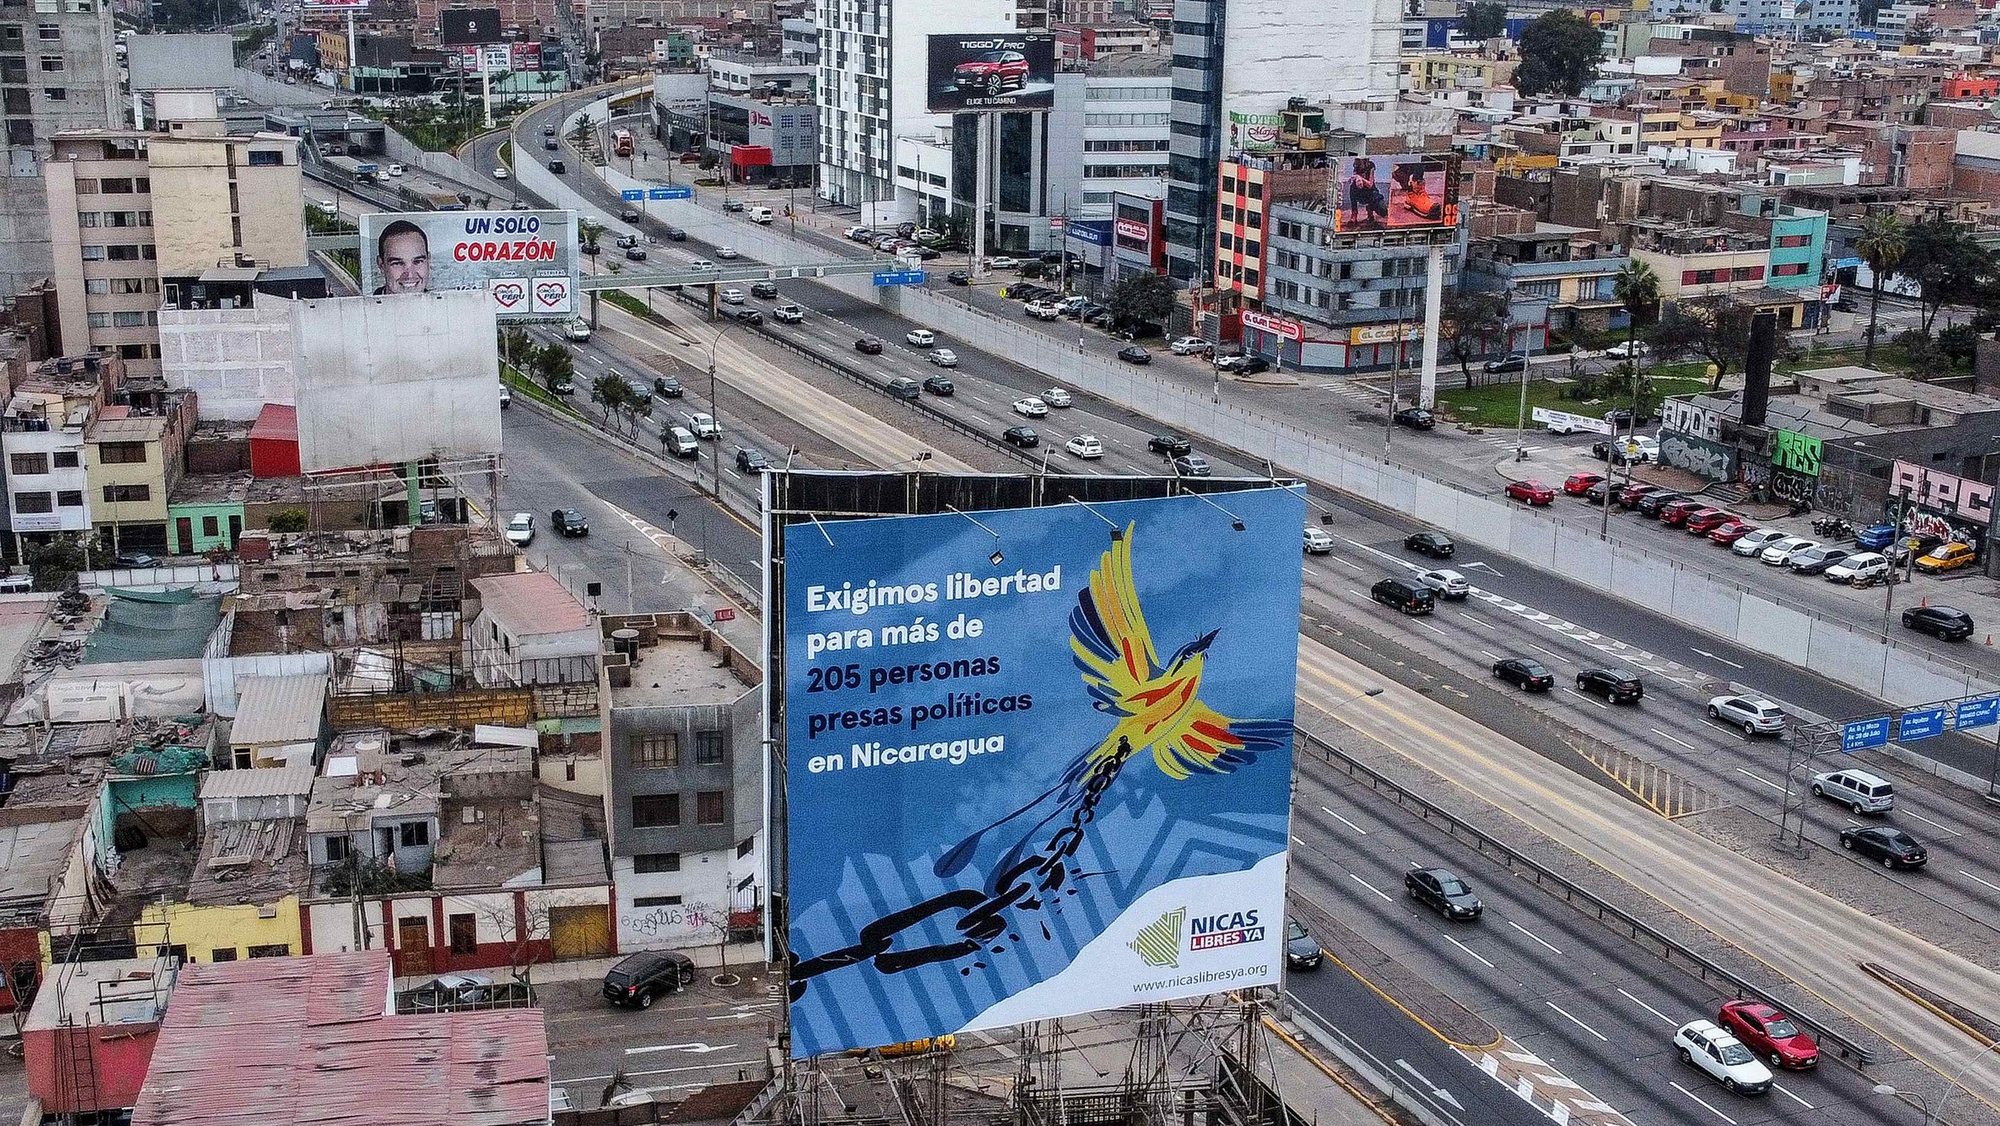 epa10225419 View of a billboard calling for the release of &#039;205 political prisoners in Nicaragua&#039; in the streets of Lima, Peru, 05 October 2022. Peru hosts the fifty-second regular session of the 52nd OAS General Assembly from 05 to 07 October in Lima where delegations from more than 30 countries will arrive.  EPA/Aldair Mejia